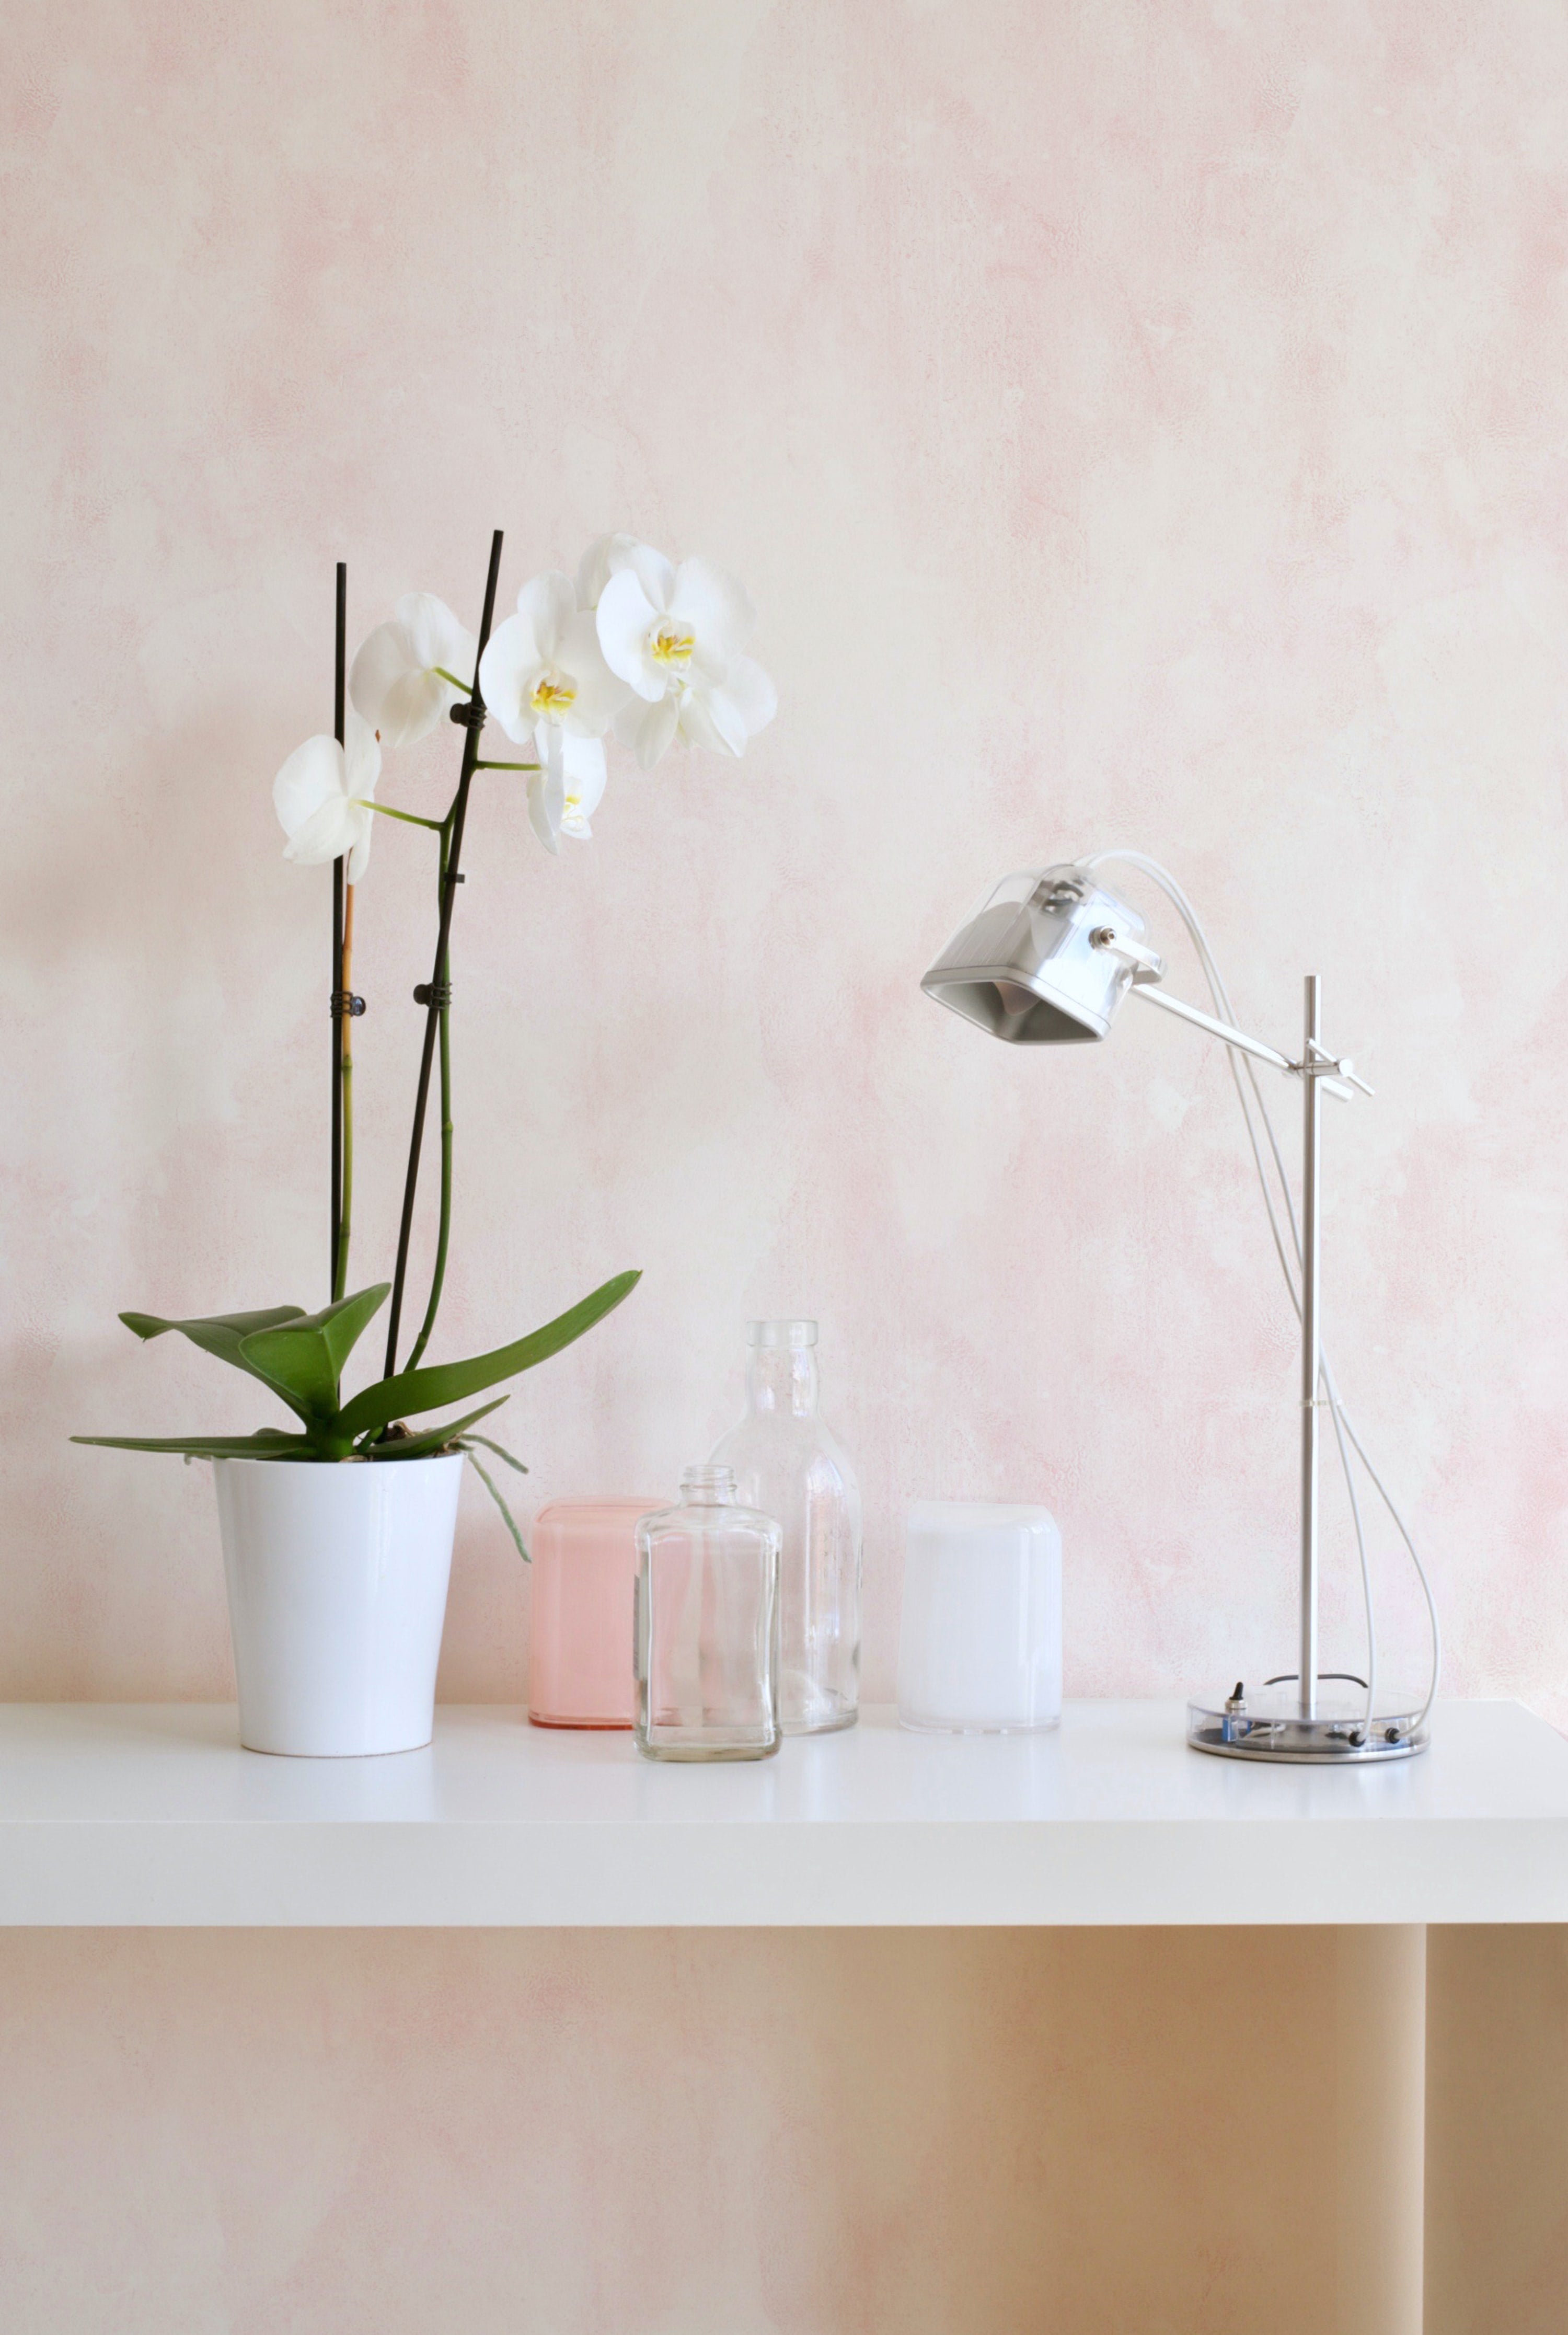 A close-up of a room decorated with Blush Limewash Wallpaper. The soft pink, watercolor-like texture provides a delicate and soothing backdrop, accentuating the simplicity of a white shelf with a potted orchid, glass bottles, and a modern desk lamp.